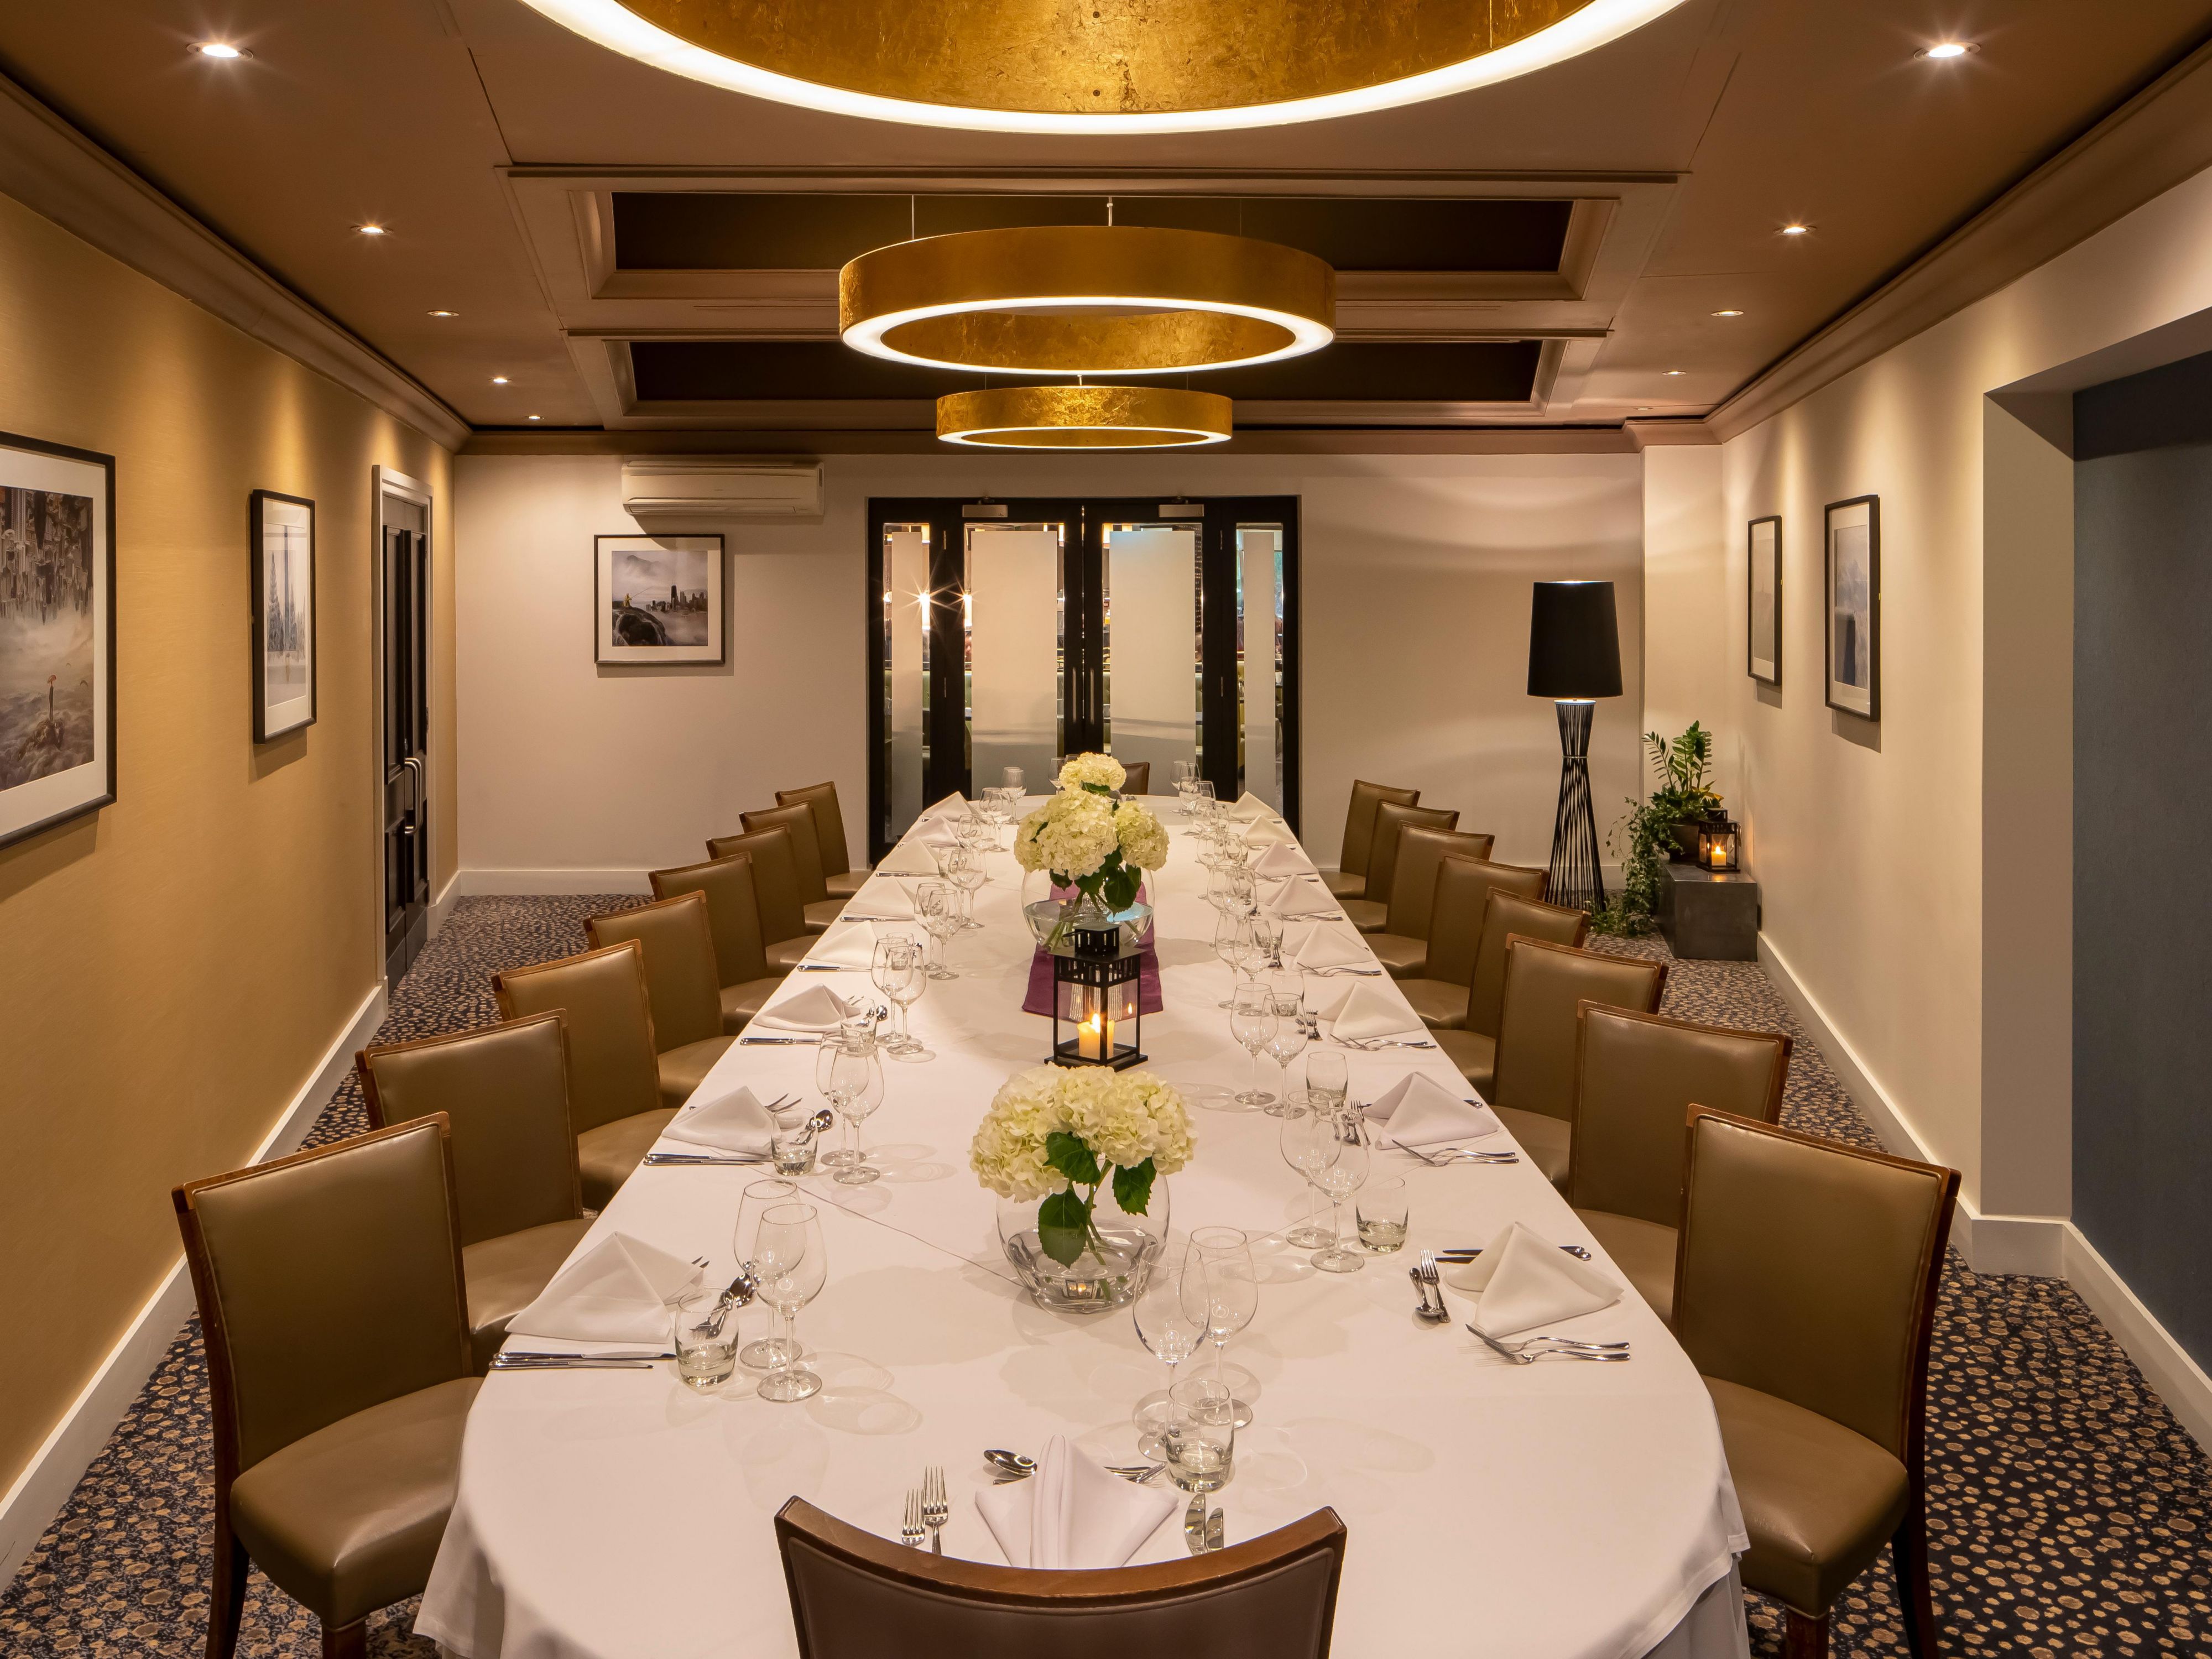 Looking for the perfect place to enjoy a special occasion? Whether it be an anniversary, a big birthday, a baby shower, or a graduation dinner we have the ideal private dining space and menu for you. For 10 to 100 people, we'll make your special celebration a memorable one.